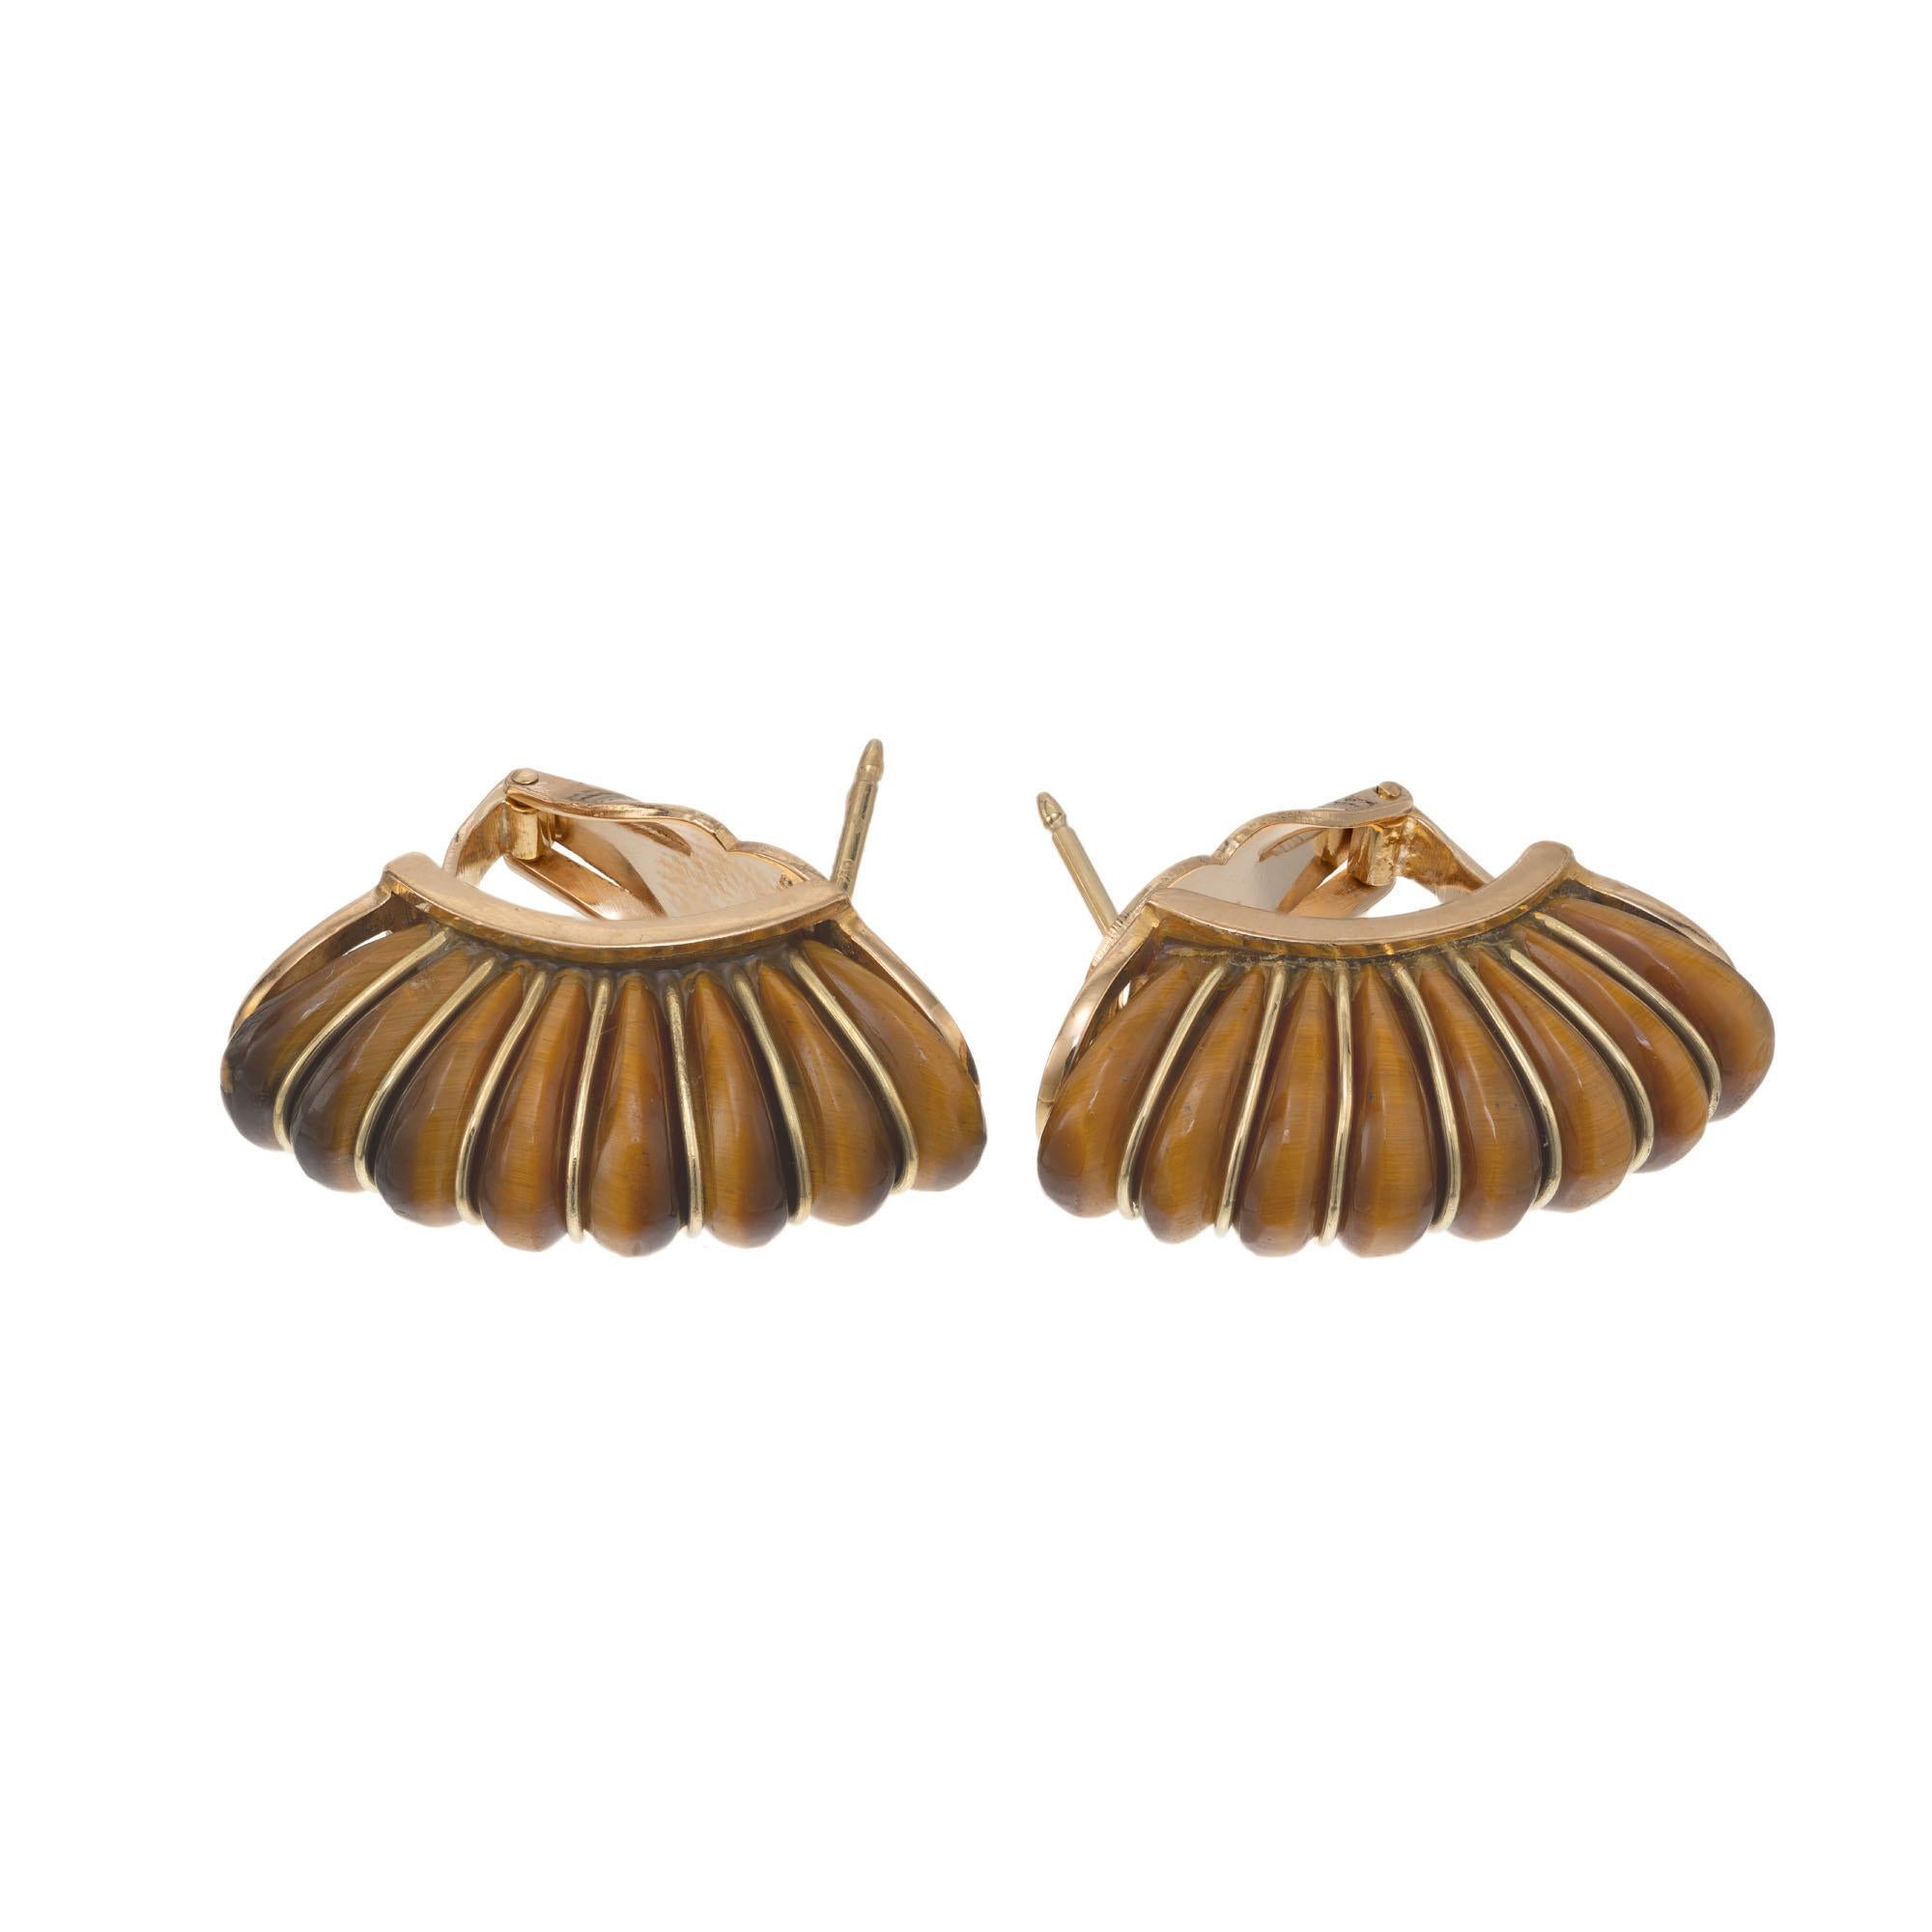 Mid-Century shrimp style tiger eye clip post earrings set in 18k yellow gold earrings.

2 shrimp cut yellowish brown tiger's eye
18k yellow gold 
Stamped: K18
14.1 grams
Top to bottom: 25.5mm or 1 Inch
Width: 9.4mm or 1/3 Inch
Depth or thickness: